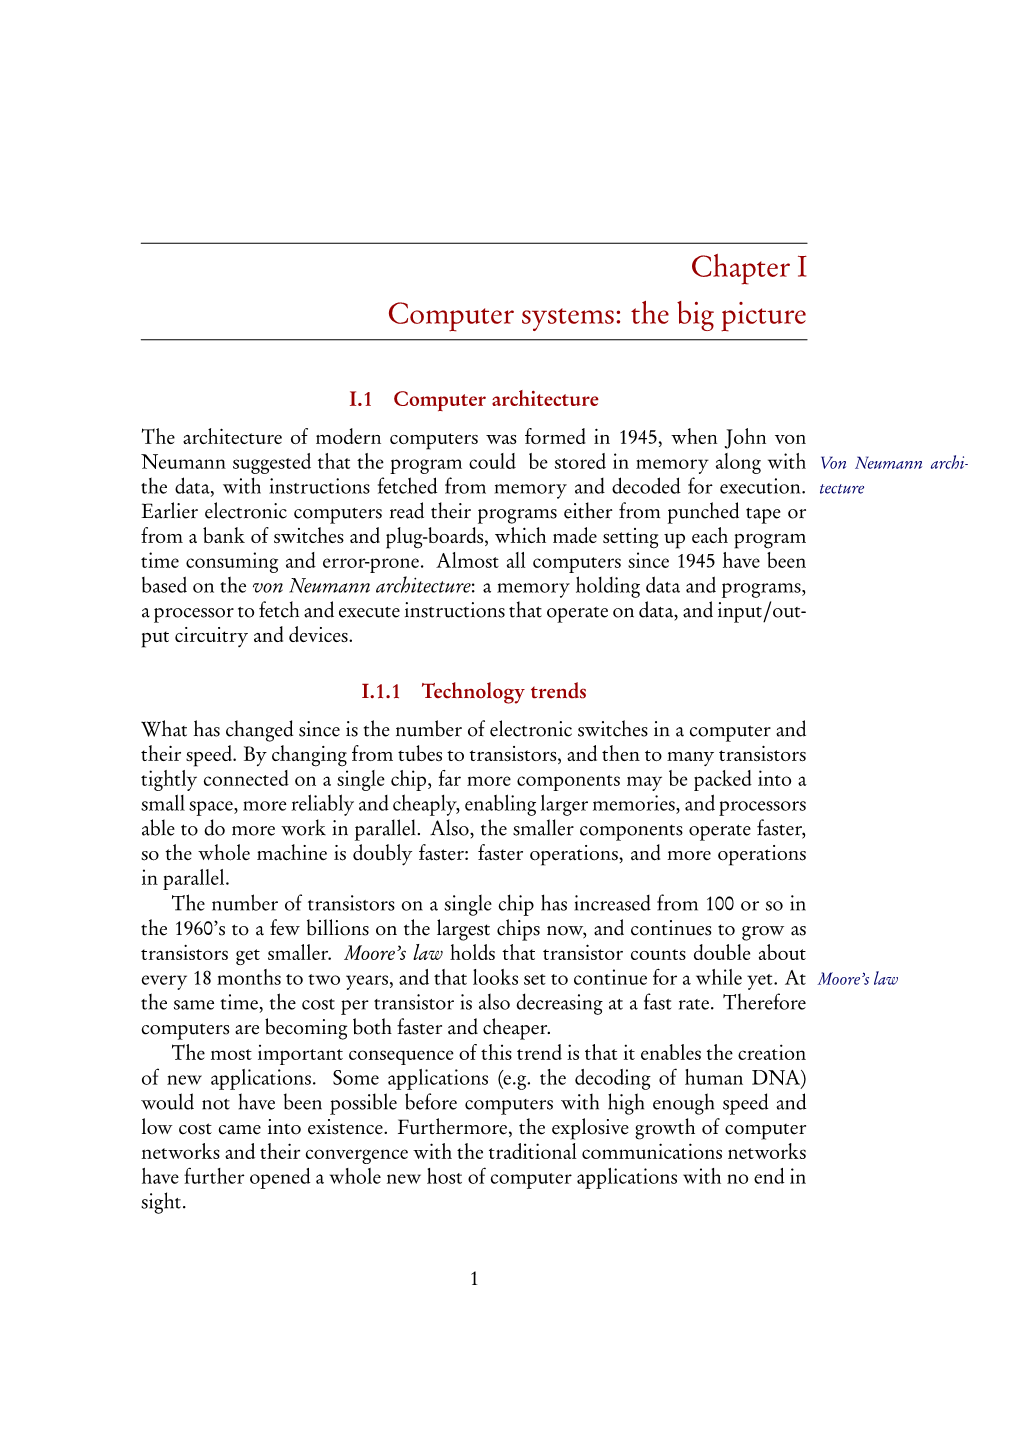 Chapter I Computer Systems: the Big Picture